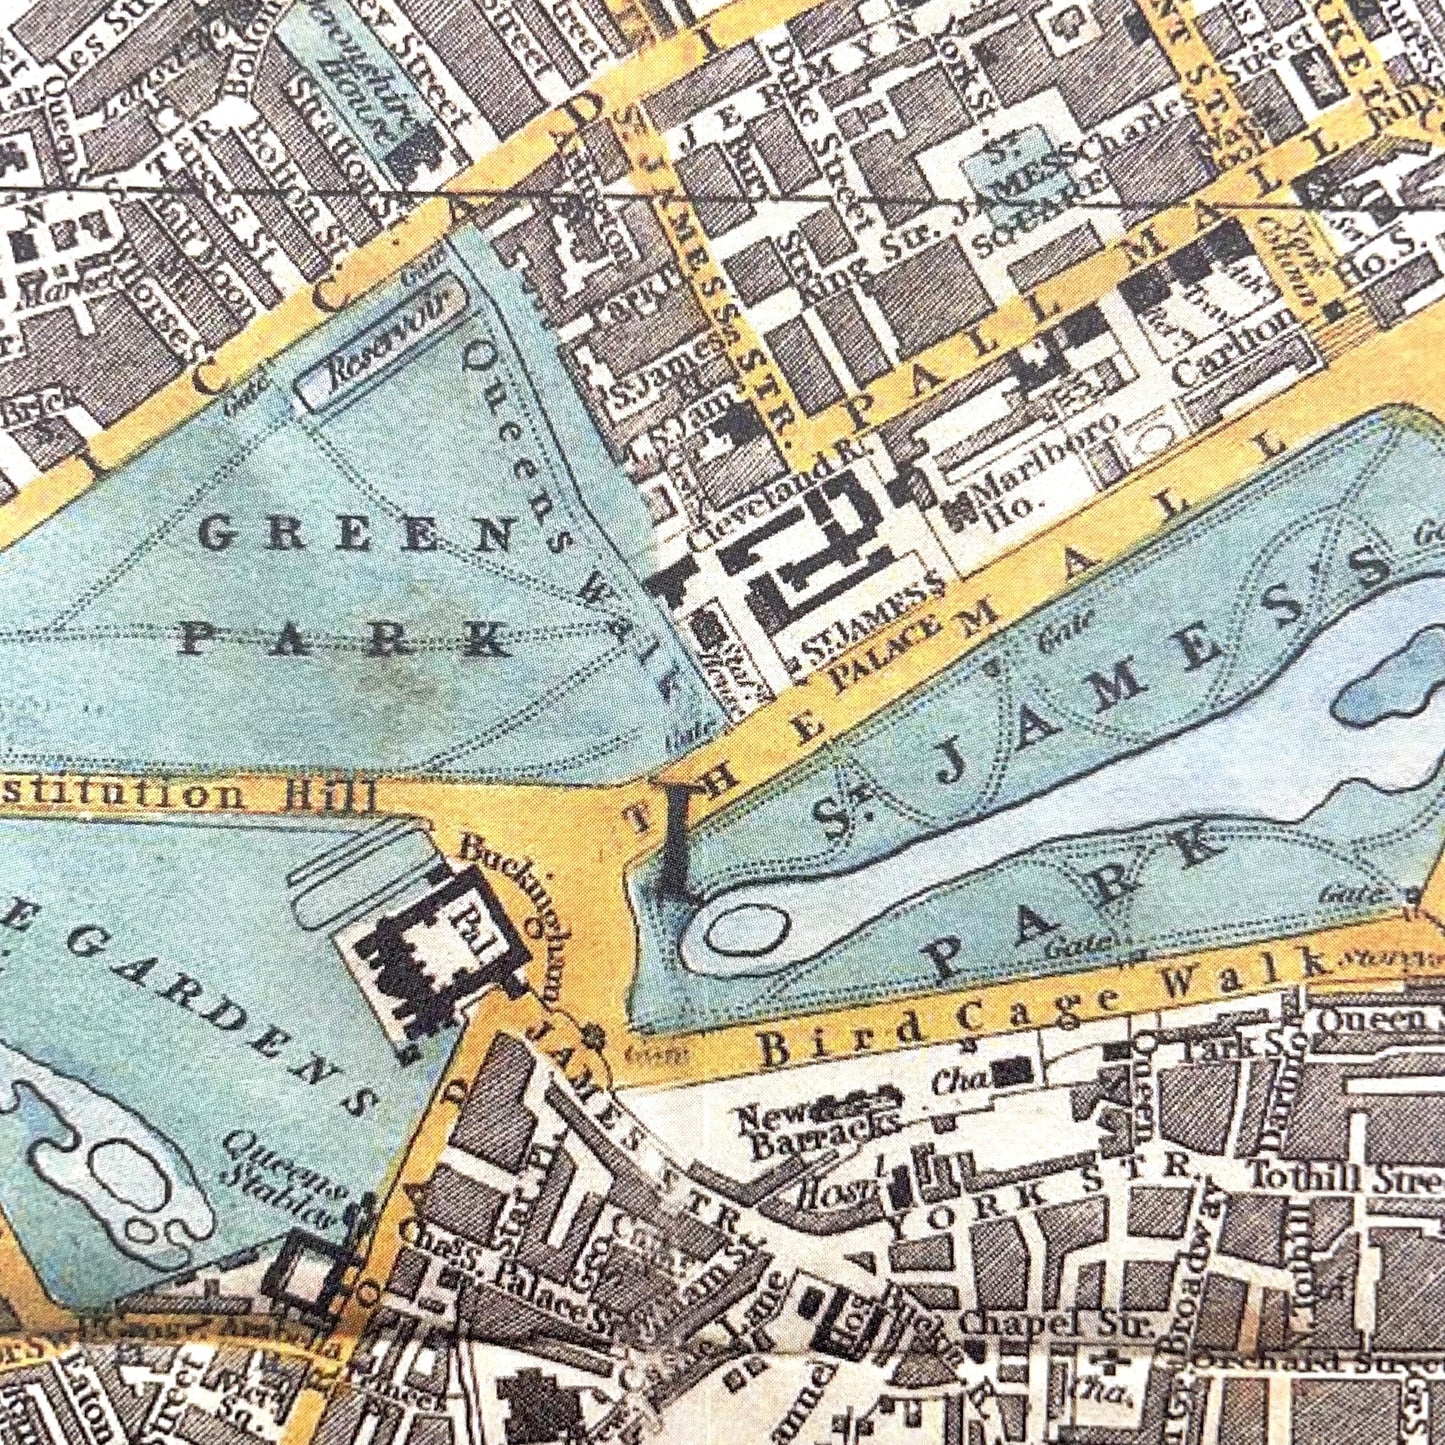 Wrapping paper with a vintage map of London (1848) by George Federick Cruchley. The map shows the proposed developments for London at this time and extends from Hyde Park in the west to the Docklands in the East, detail of Green Park